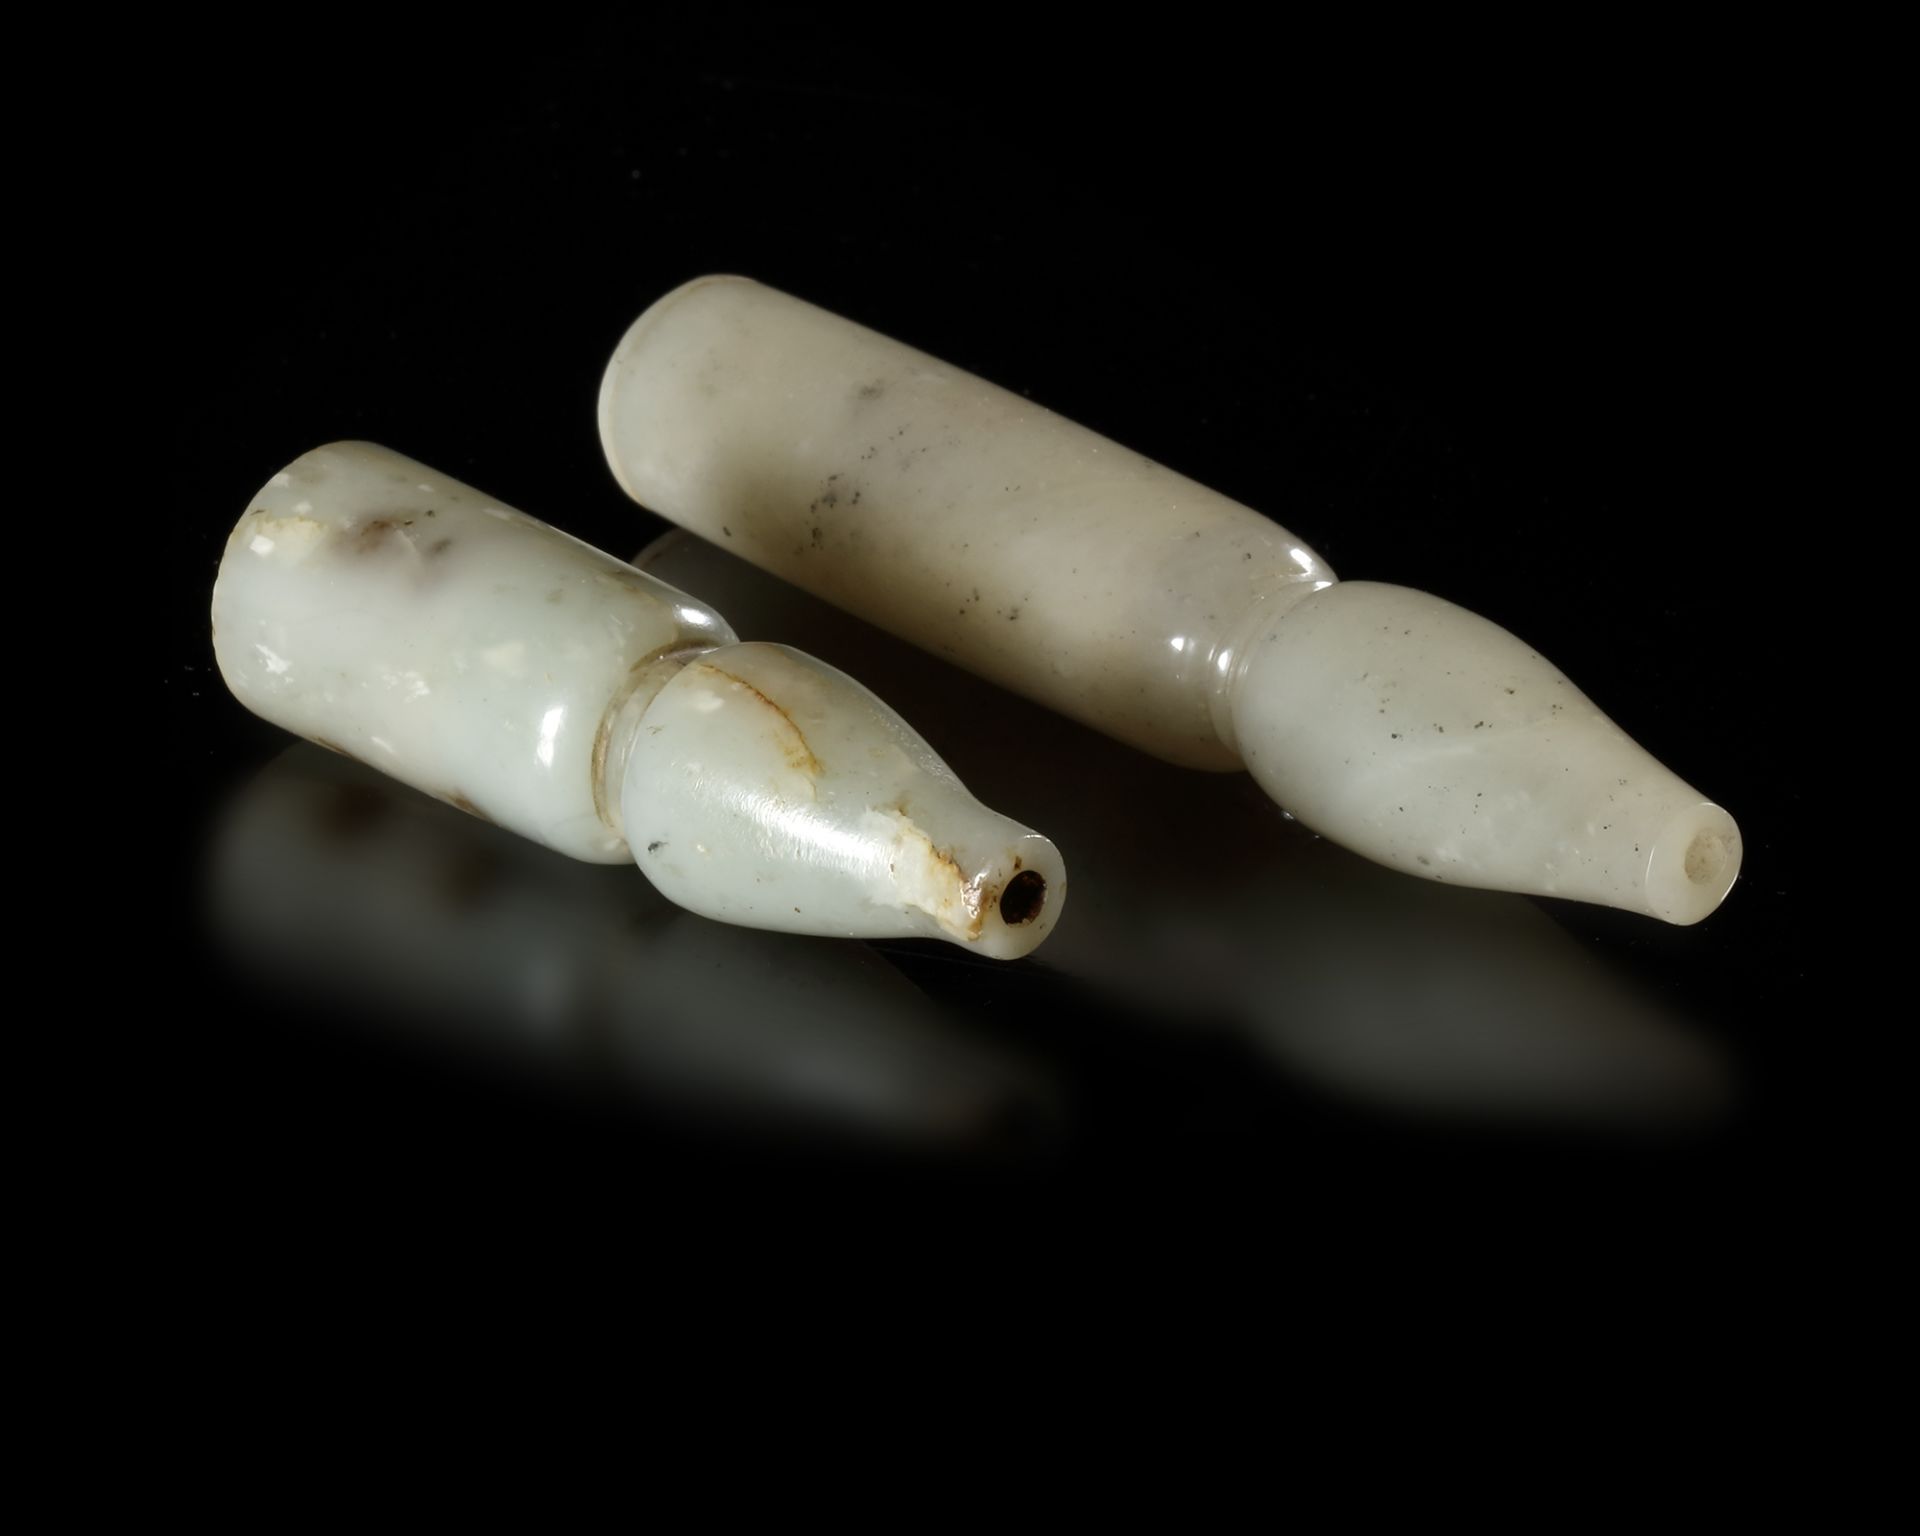 TWO MUGHAL PALE OLIVE GREEN MUGHAL JADE MOUTHPIECES, 18TH-19TH CENTURY - Image 3 of 4